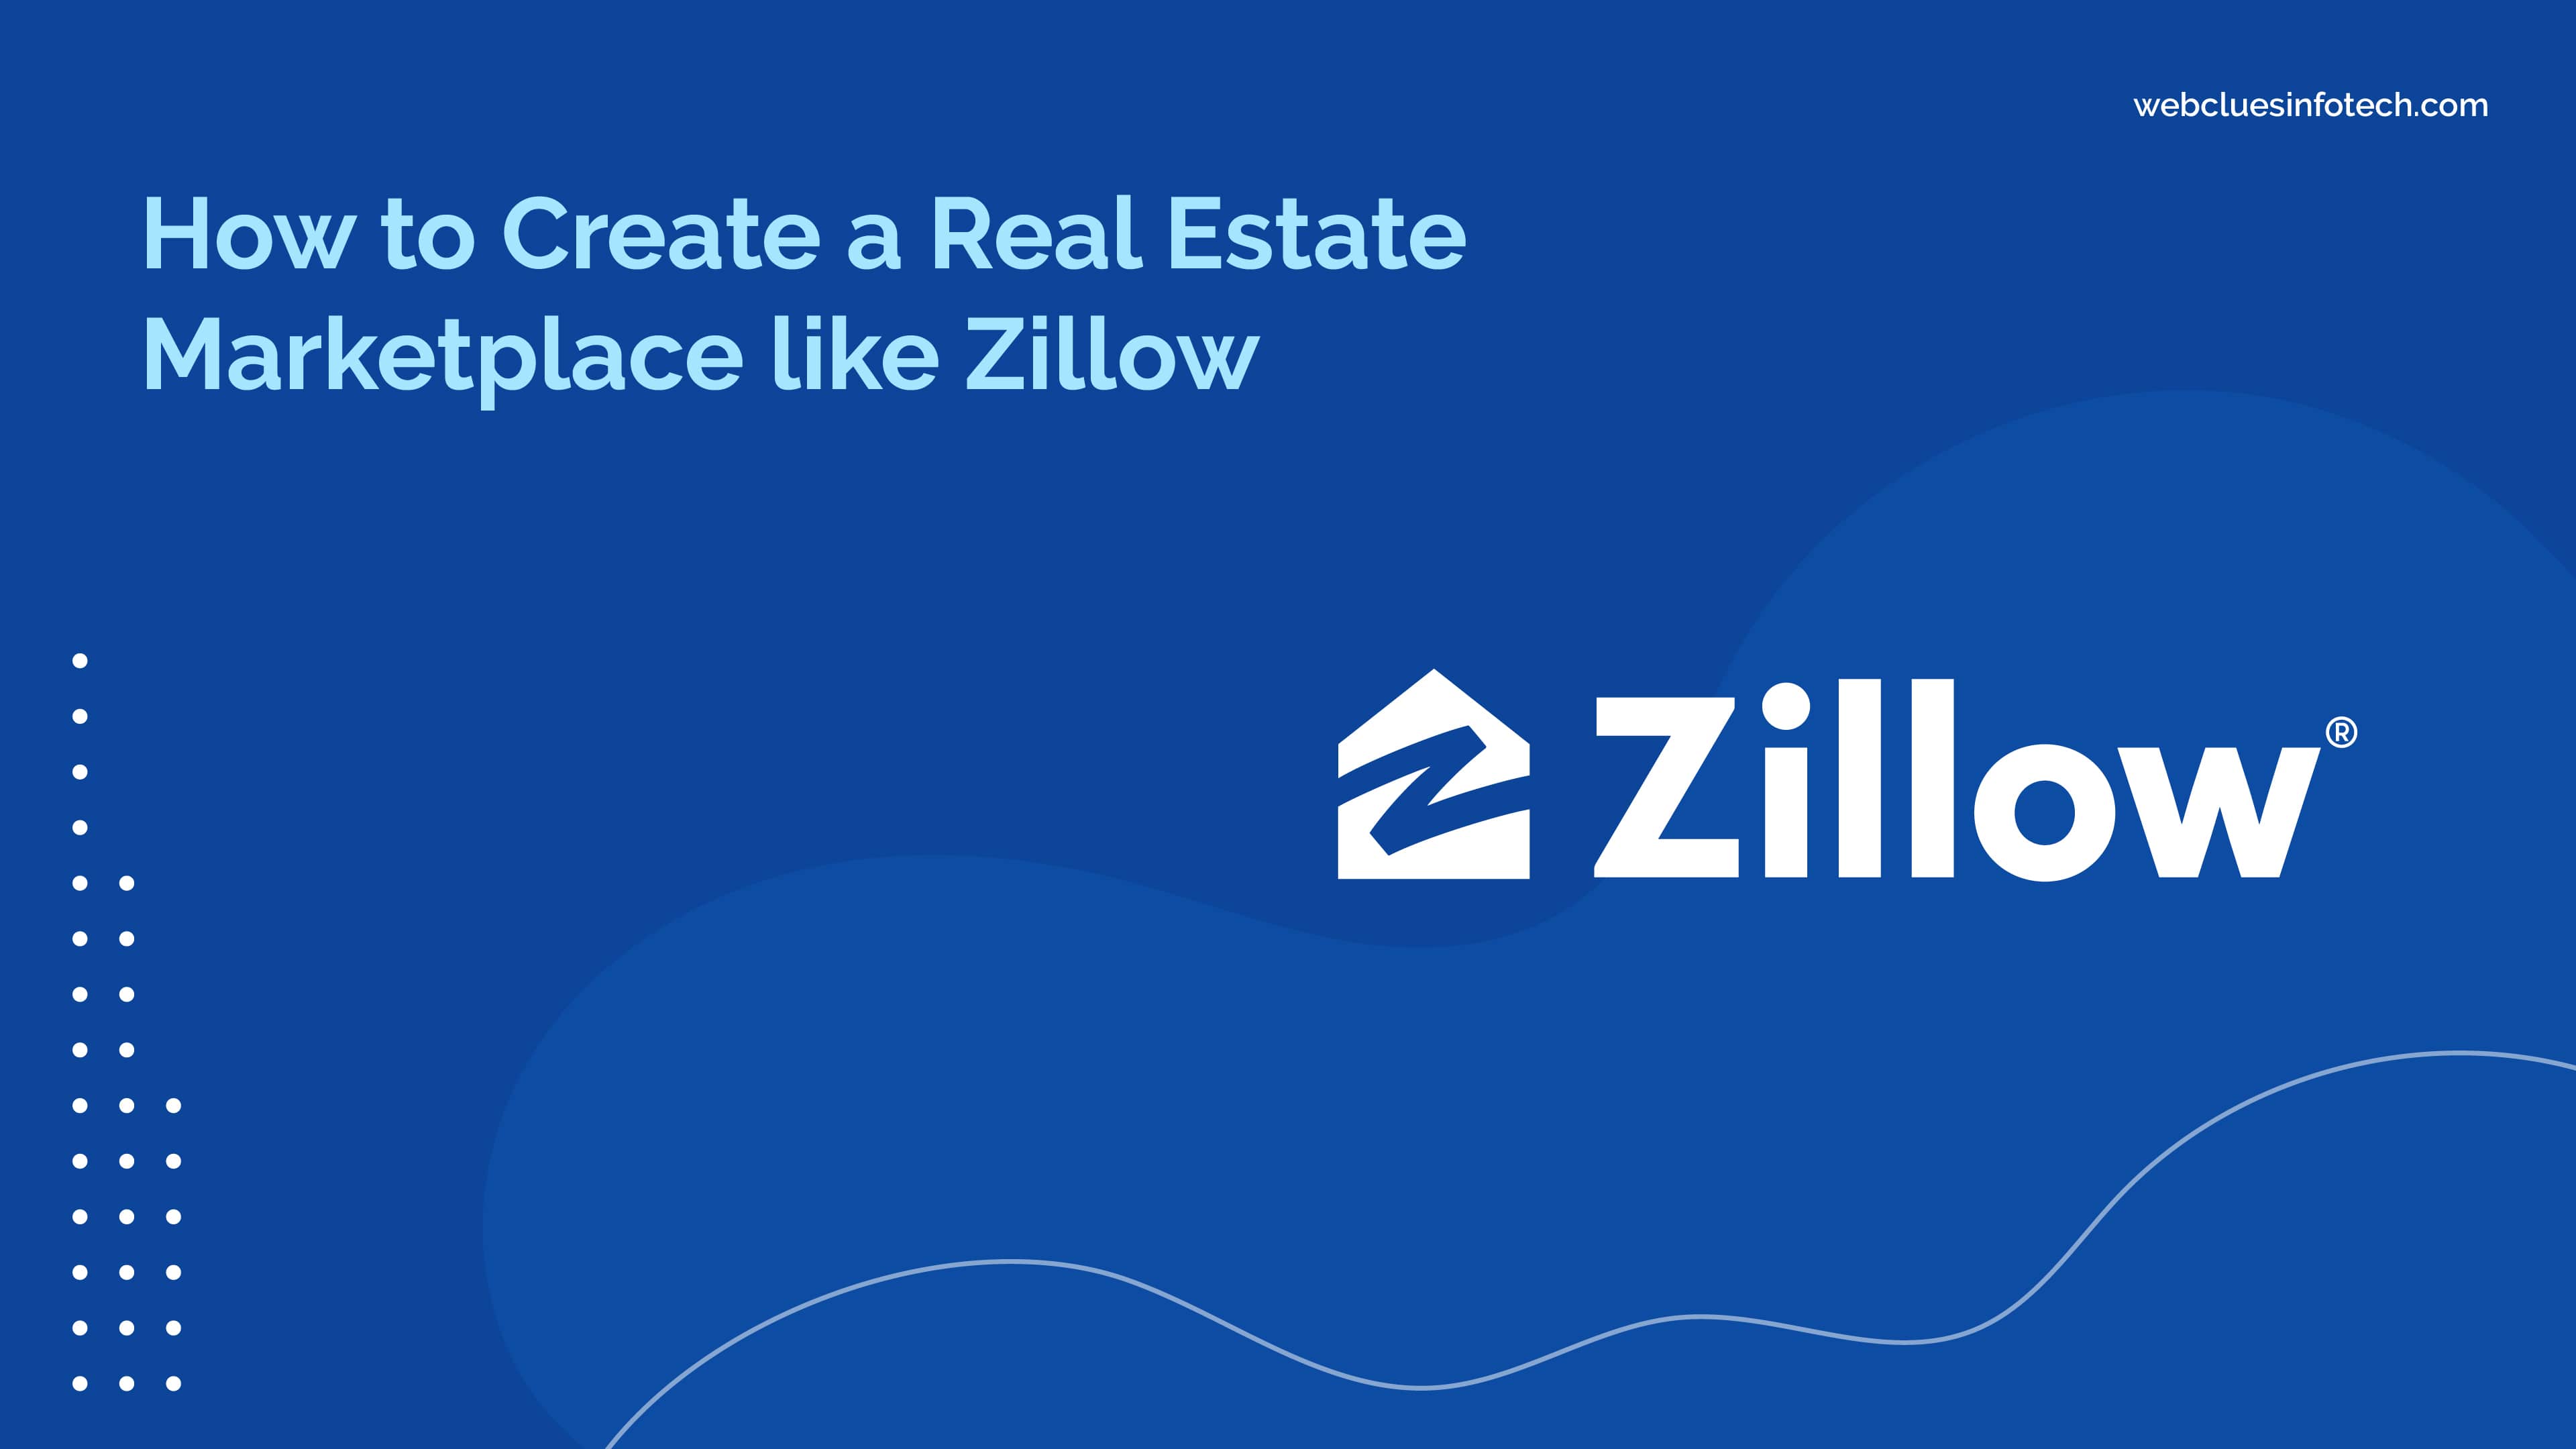 How to Create A Real Estate Marketplace Like Zillow?